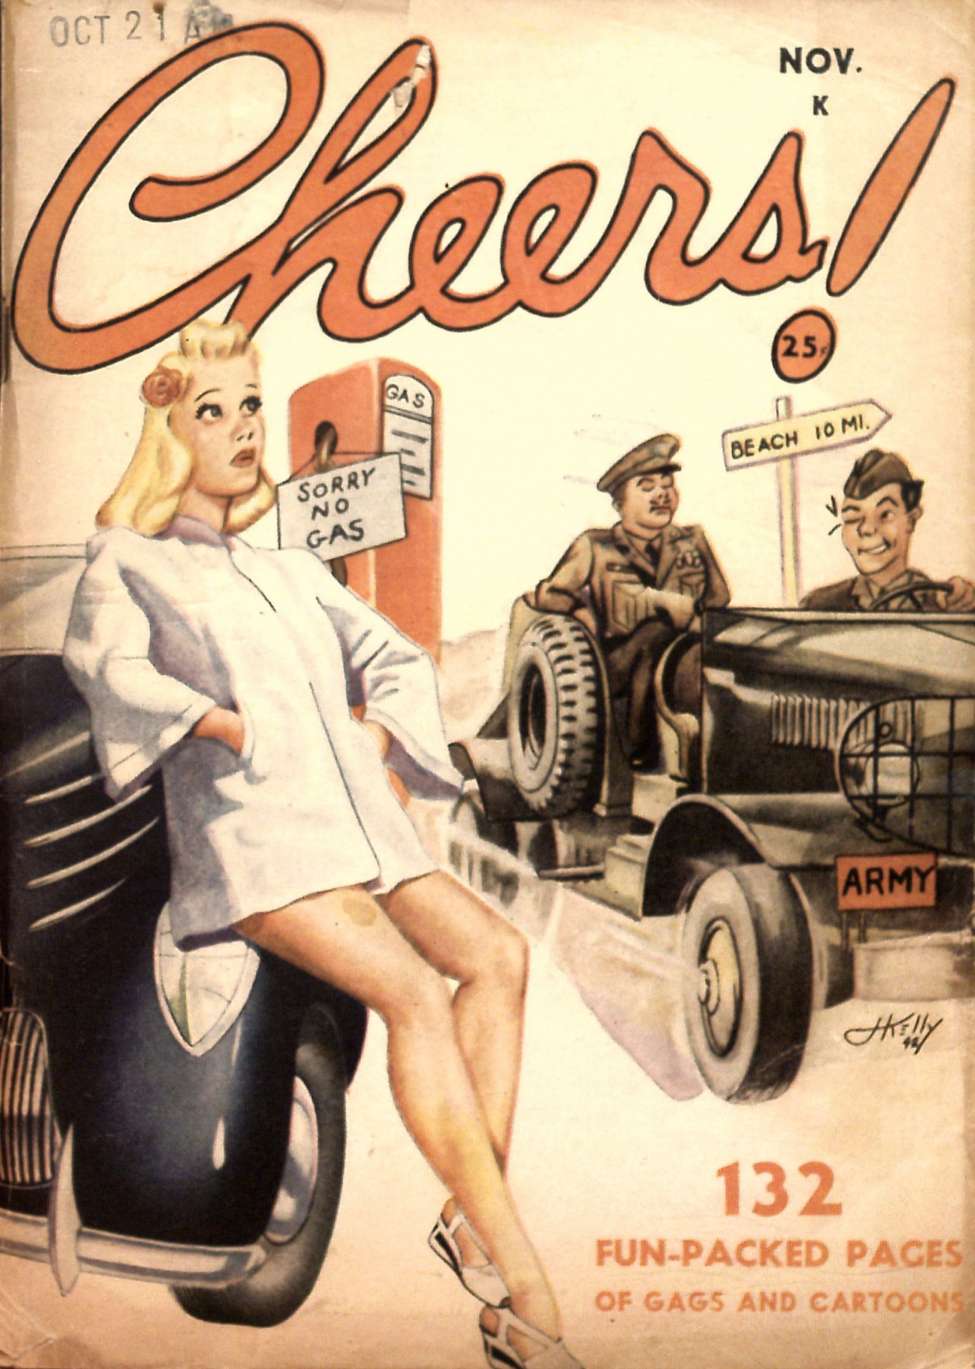 Book Cover For Cheers 1